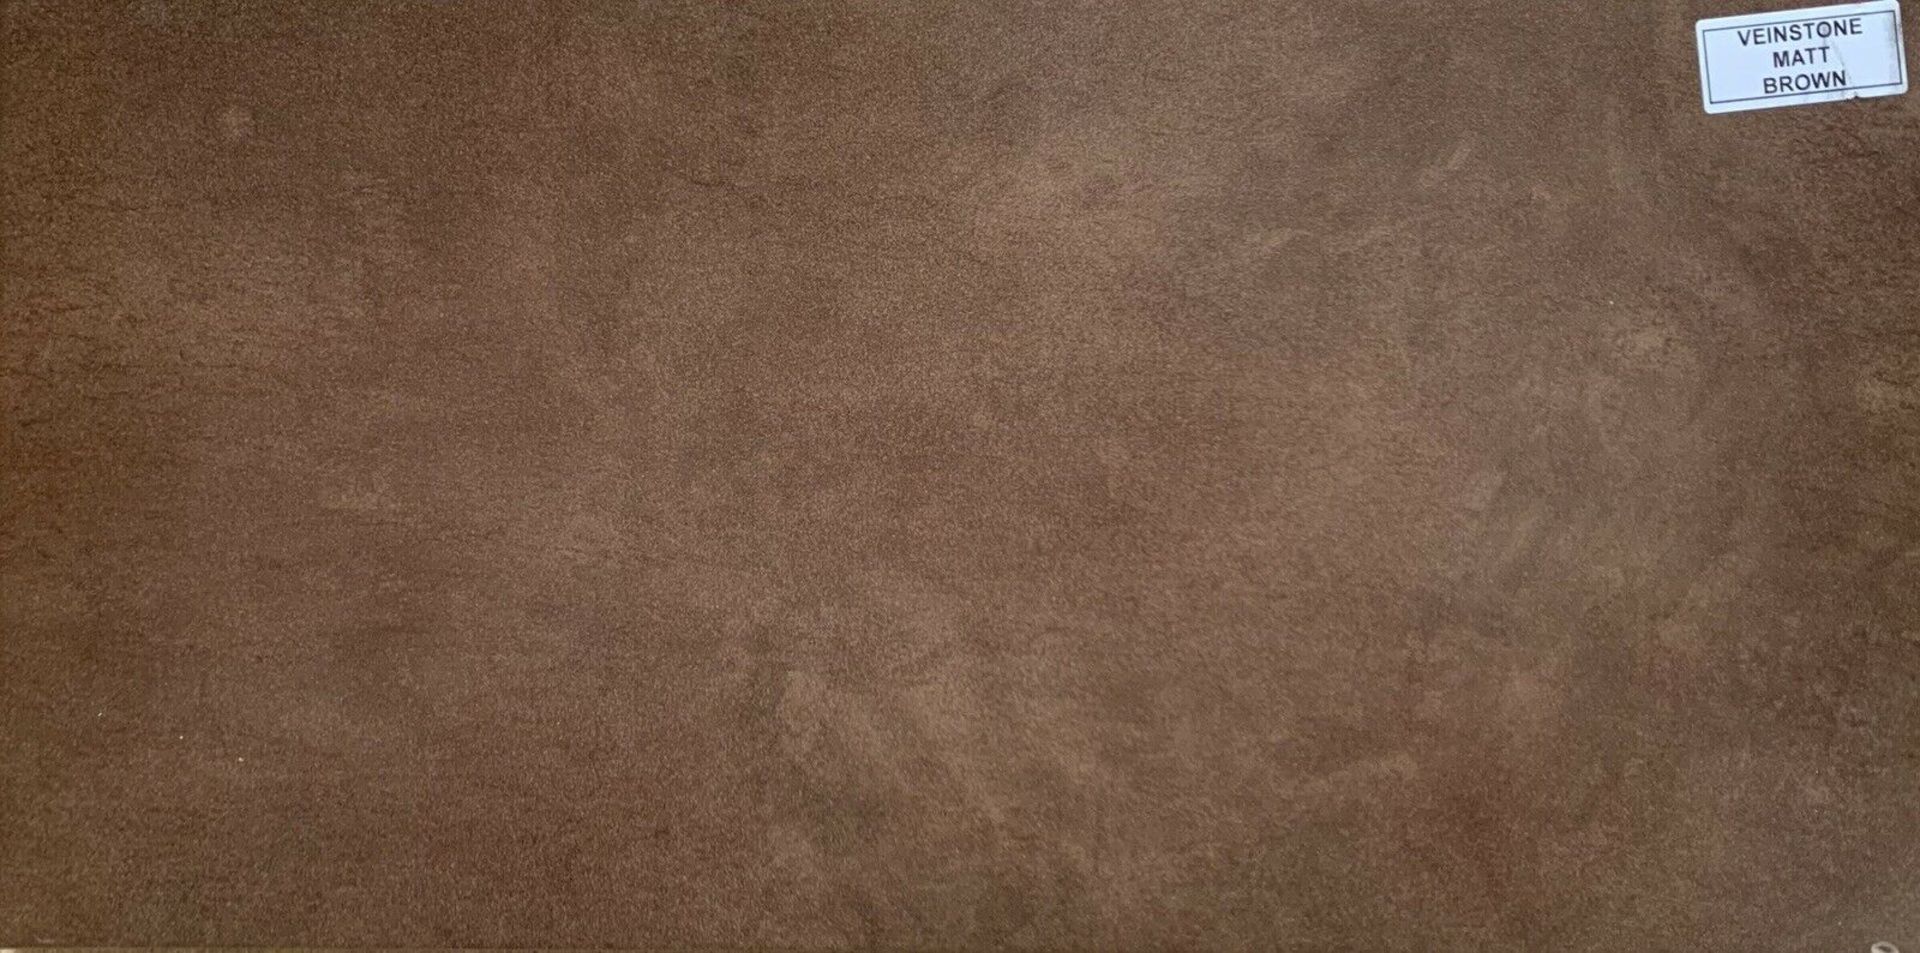 NEW 11.88 Square Meters of Veinstone Lapatto Brown Matt Wall and Floor Tiles. 300x600mm, 1.08m2 - Image 2 of 2